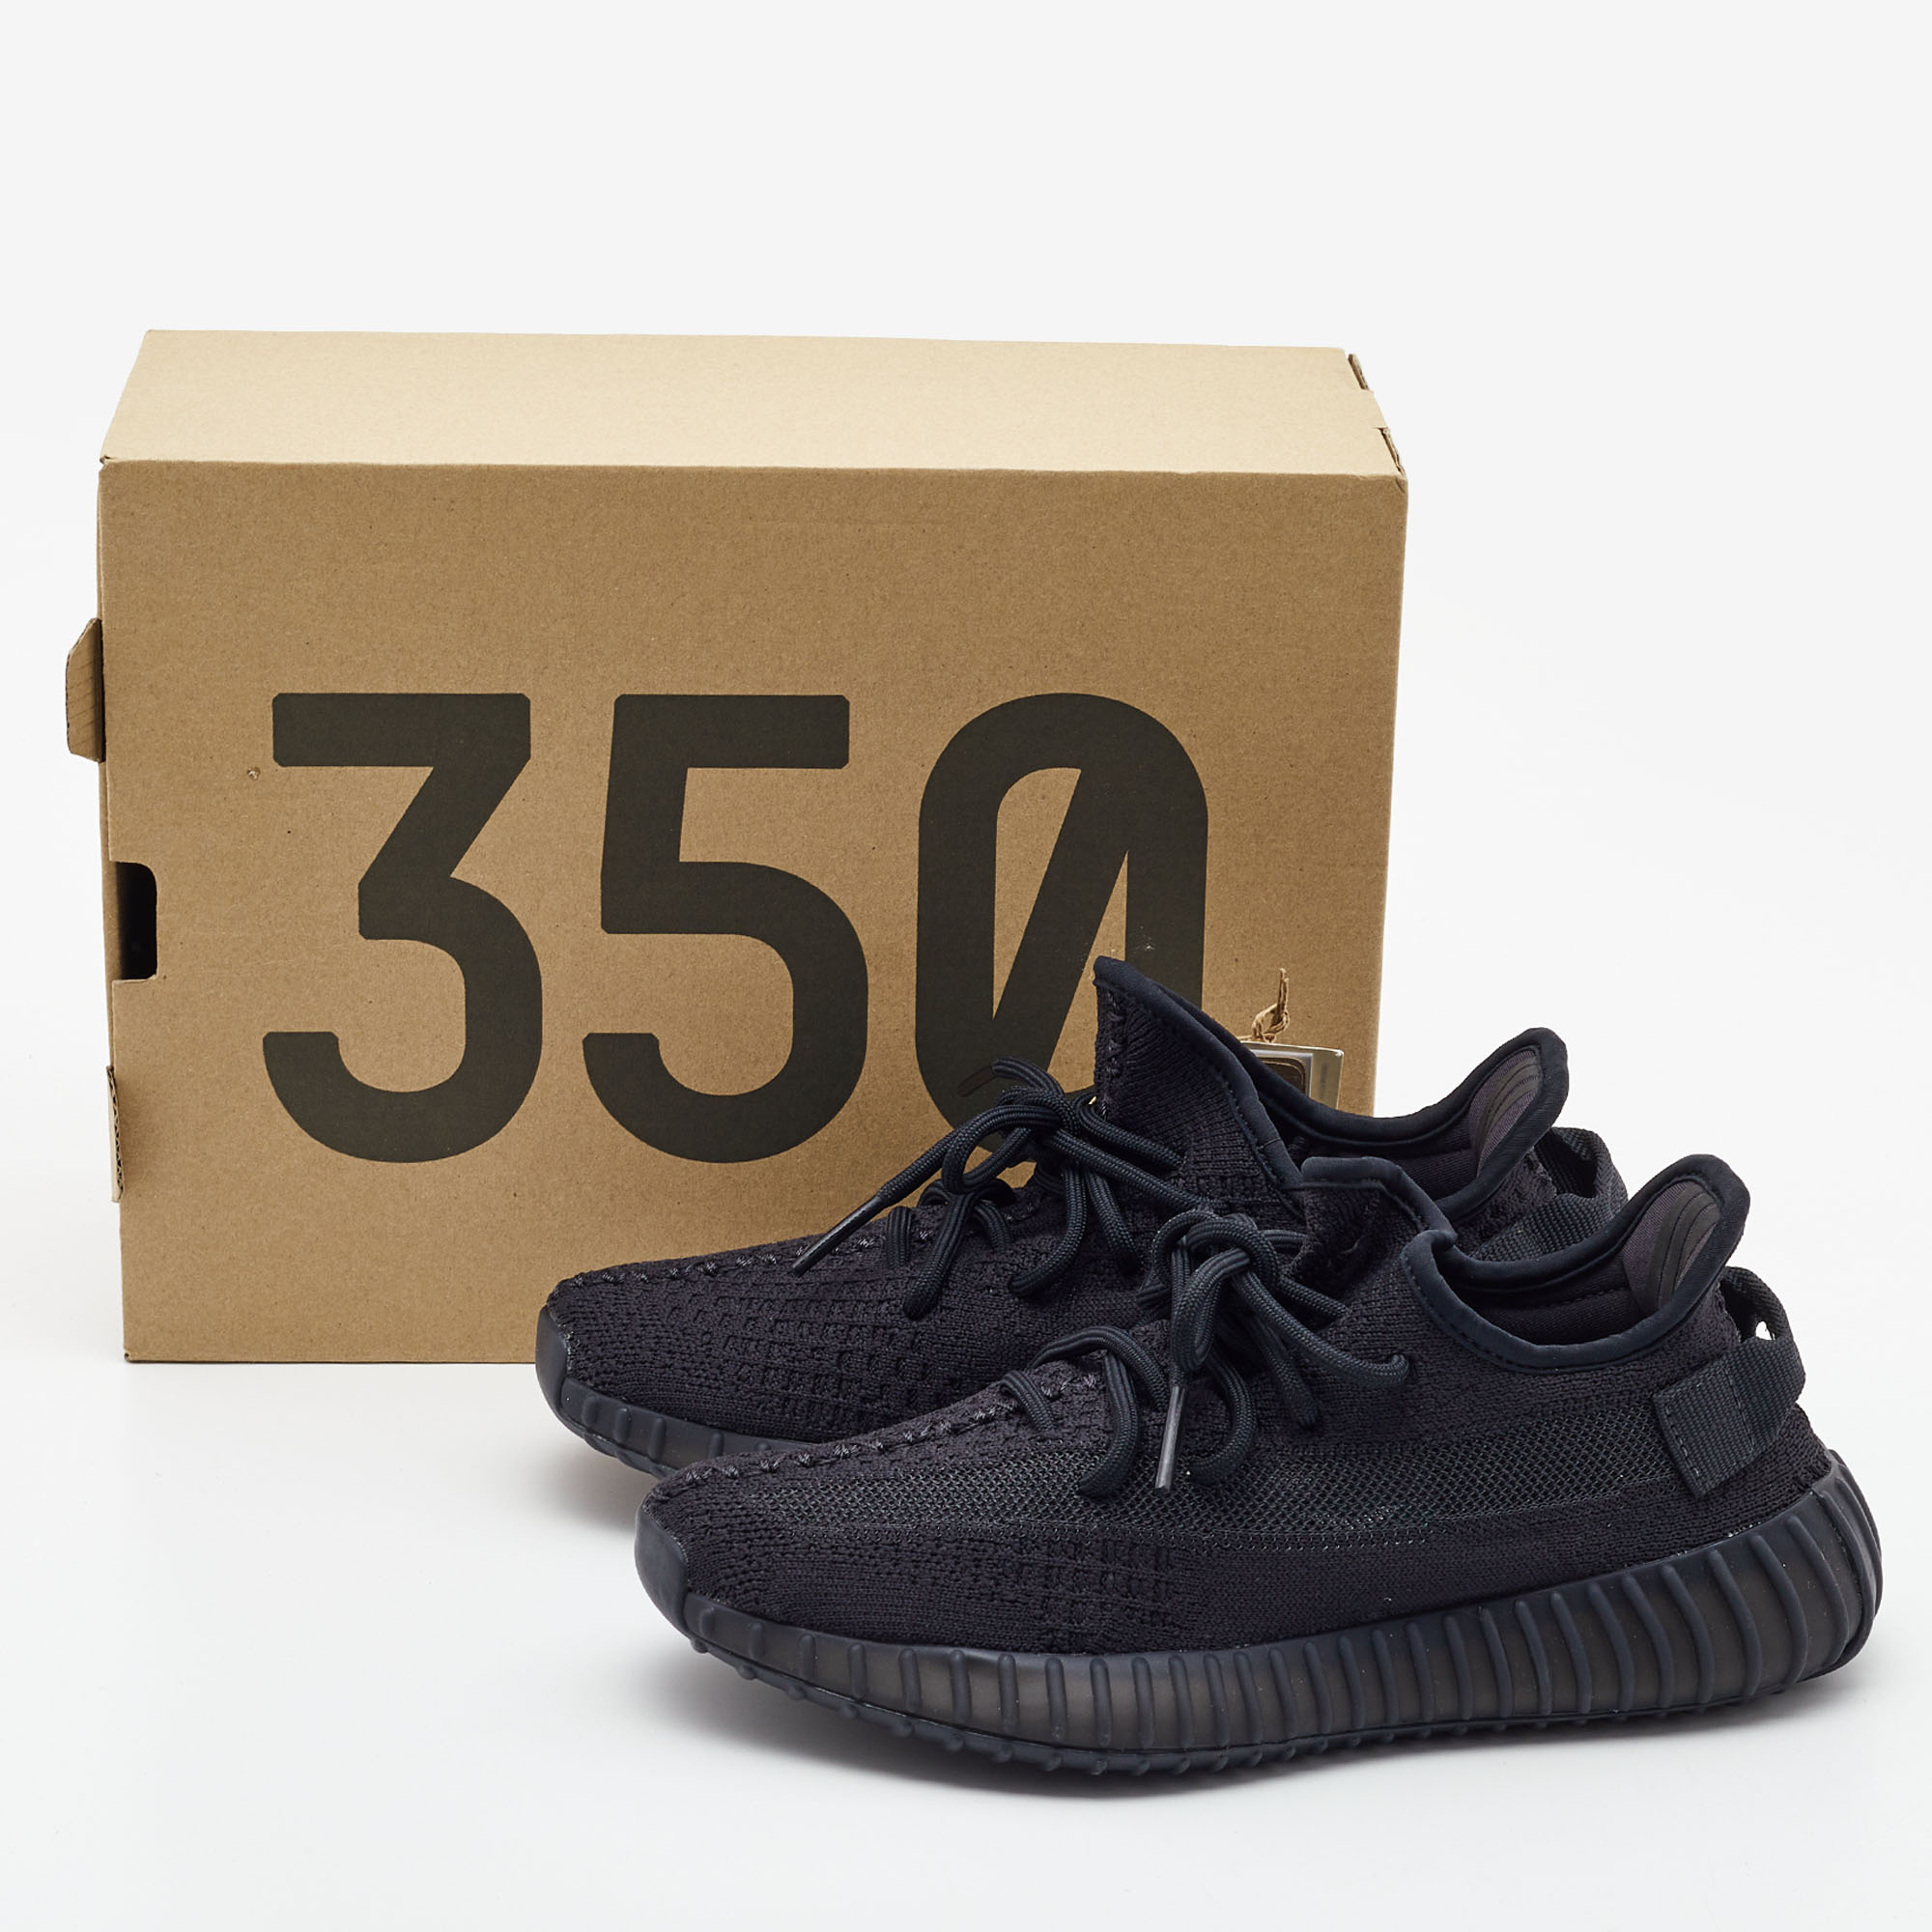 Yeezy X Adidas Black Fabric Boost 350 V2 Cinder Sneakers Size 38